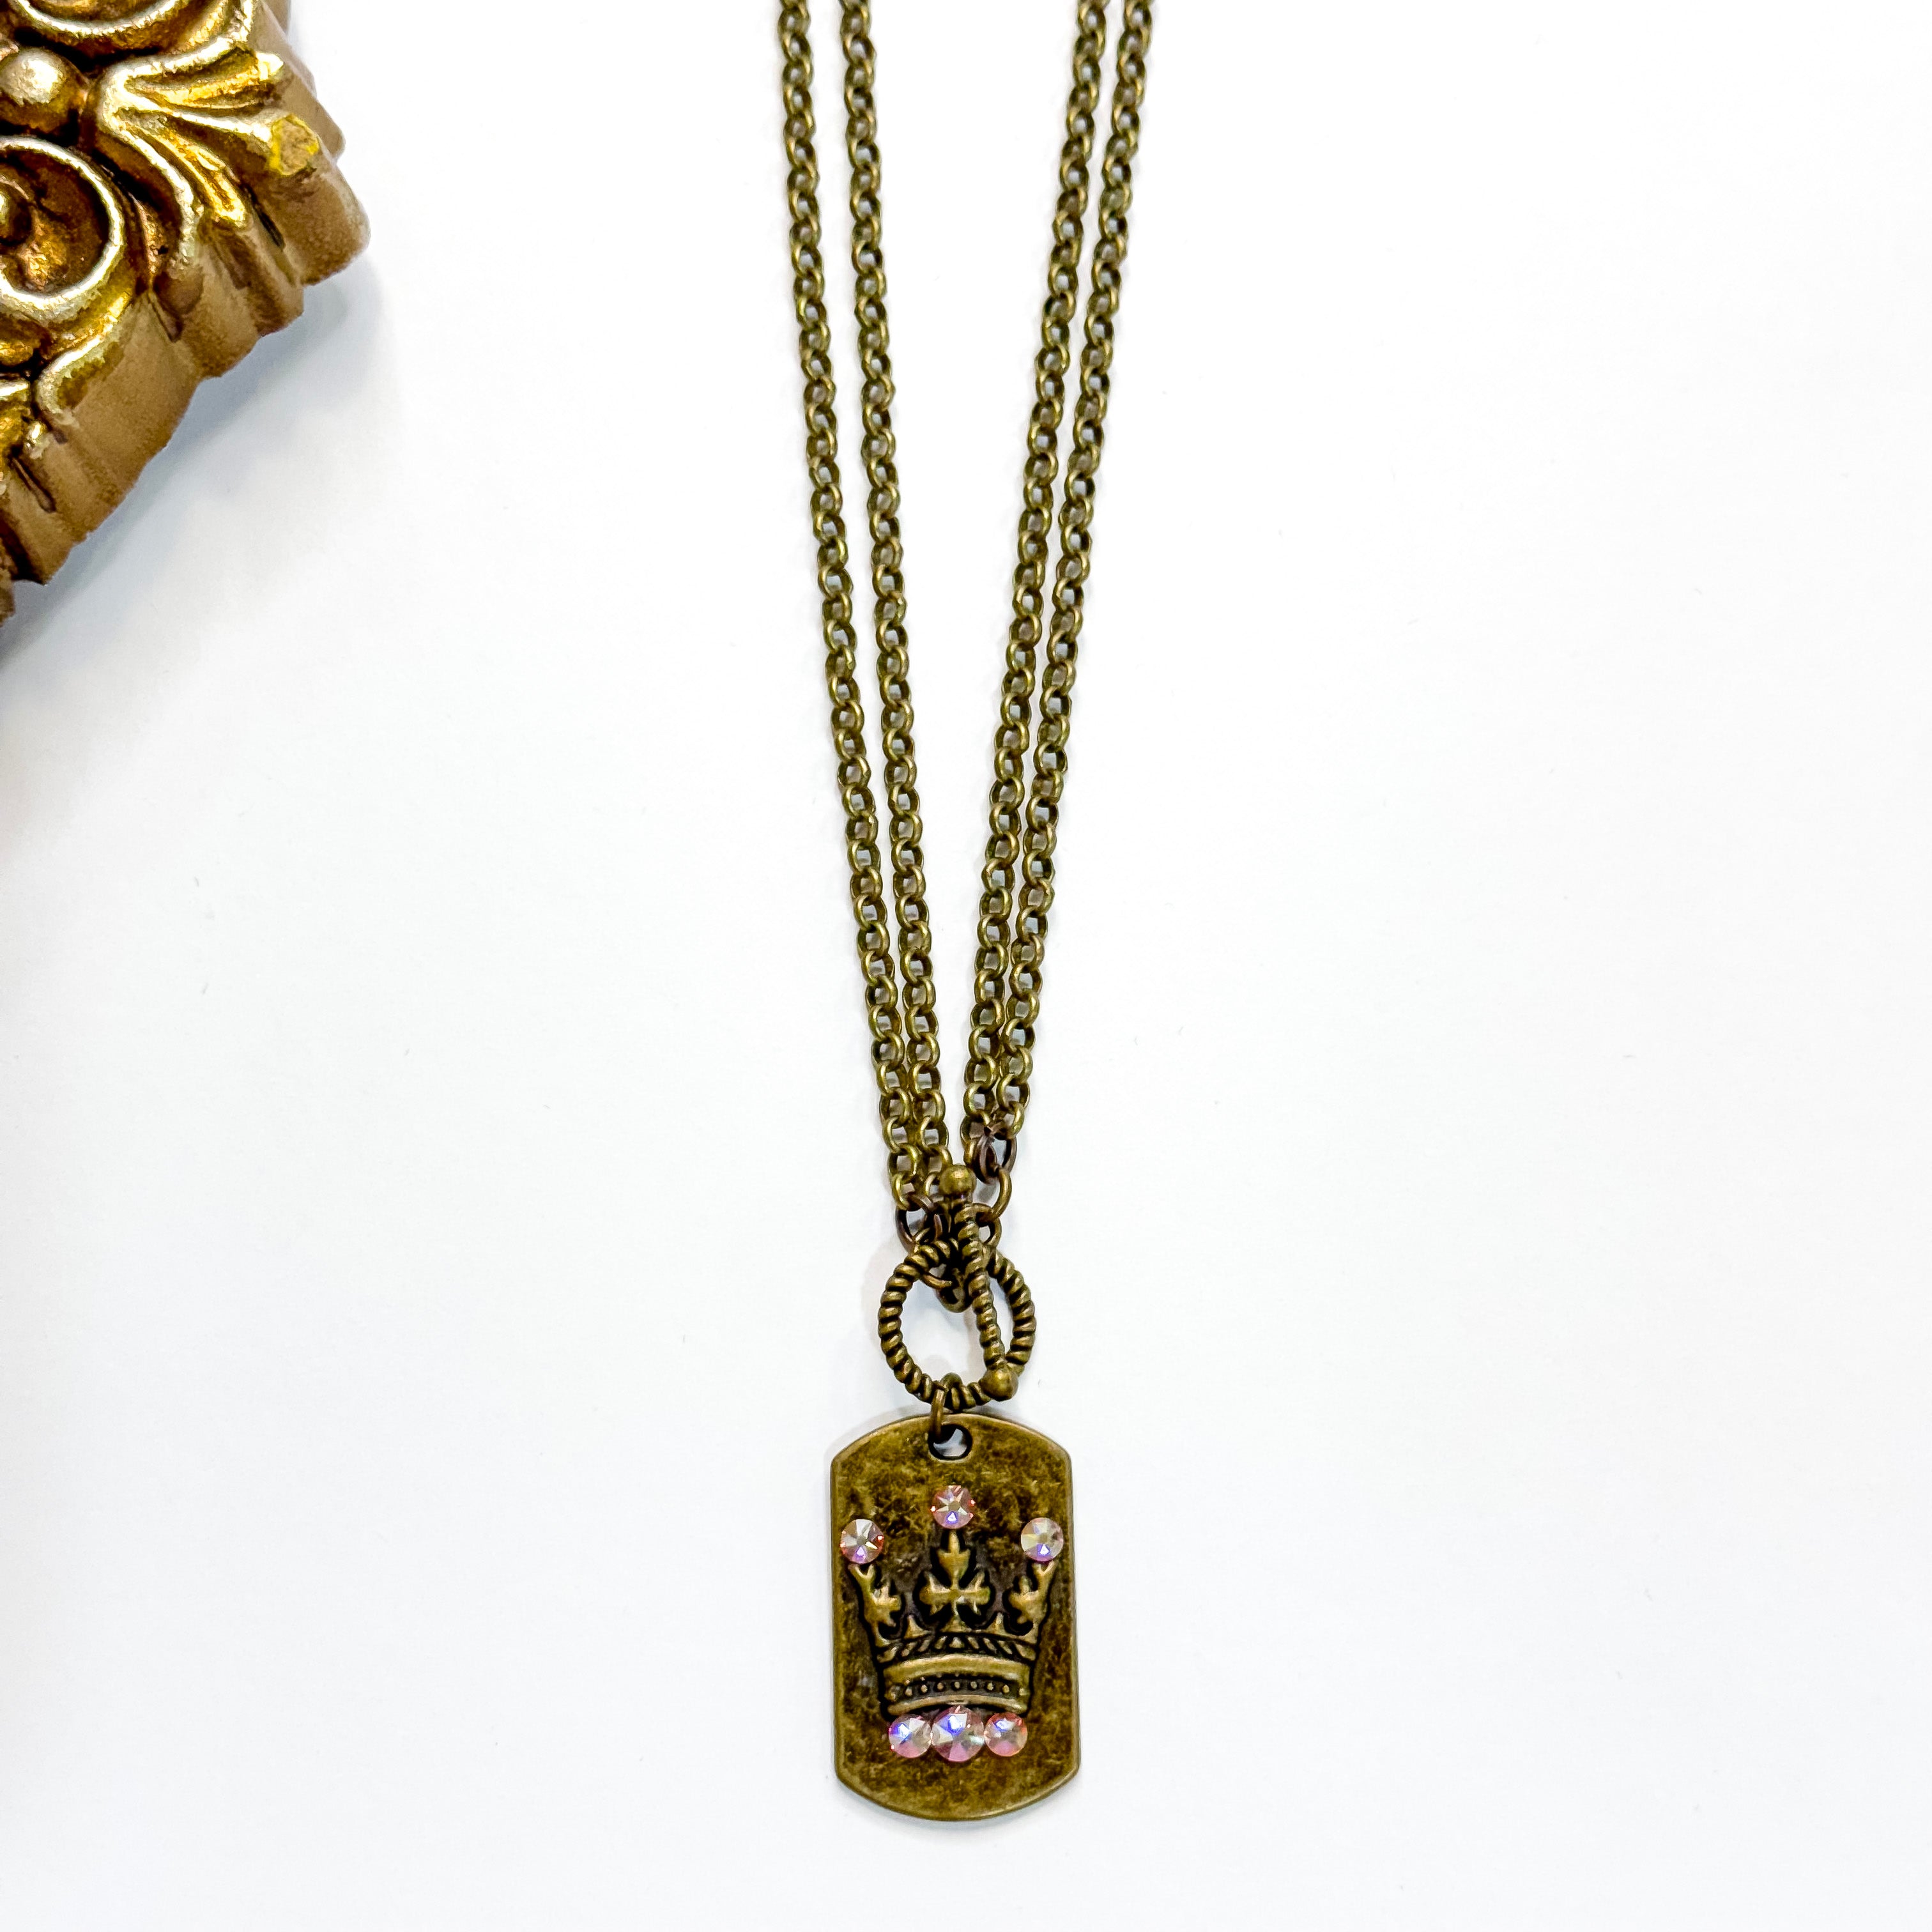 Pink Panache | Crowned Jewel Bronze Tone Necklace with AB Crystal Accents